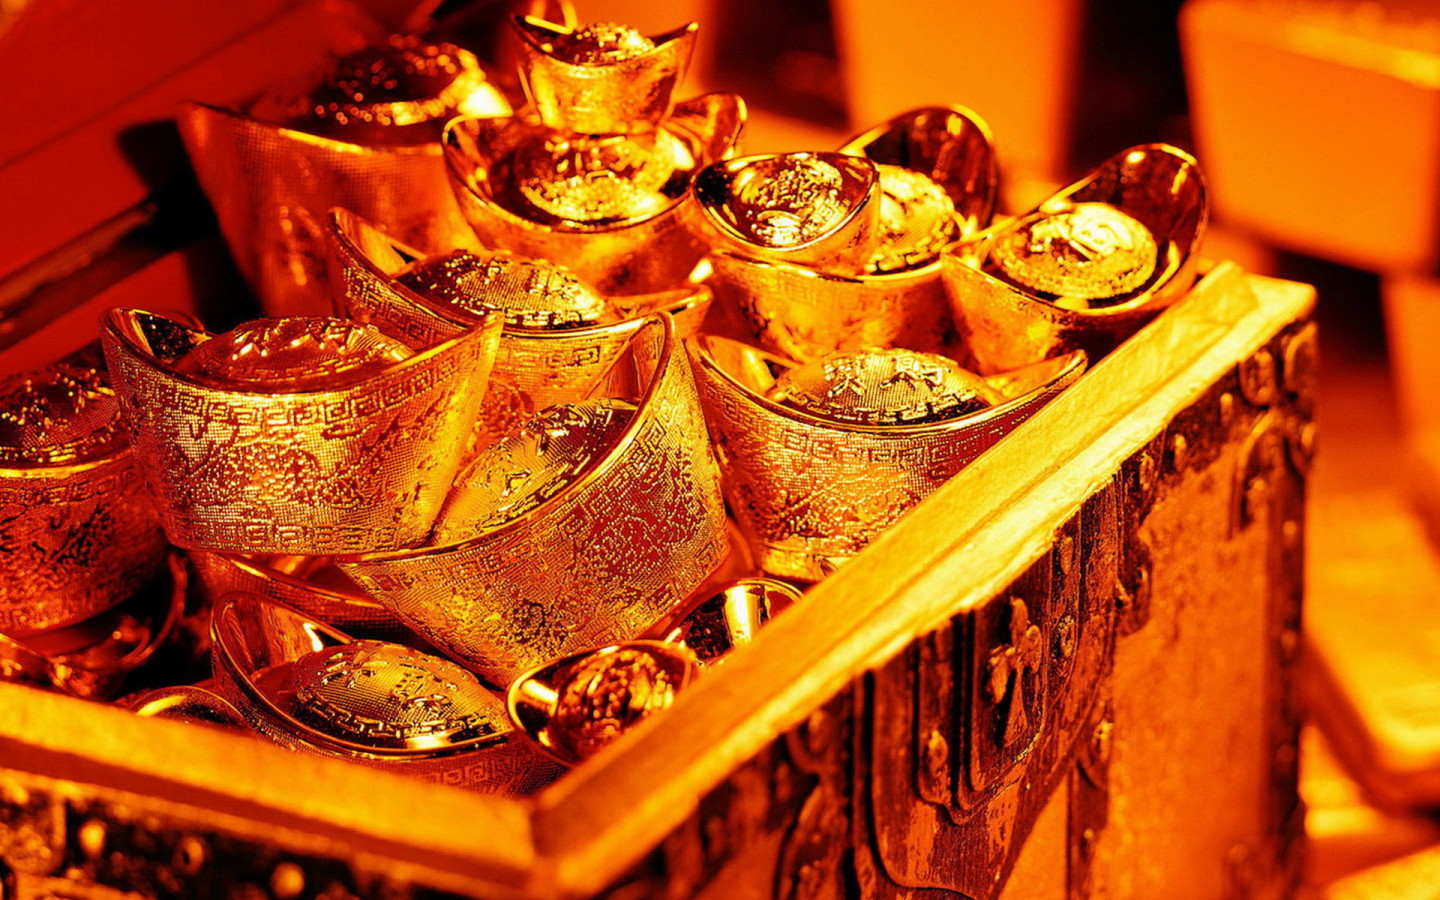 Coffer with golden thing